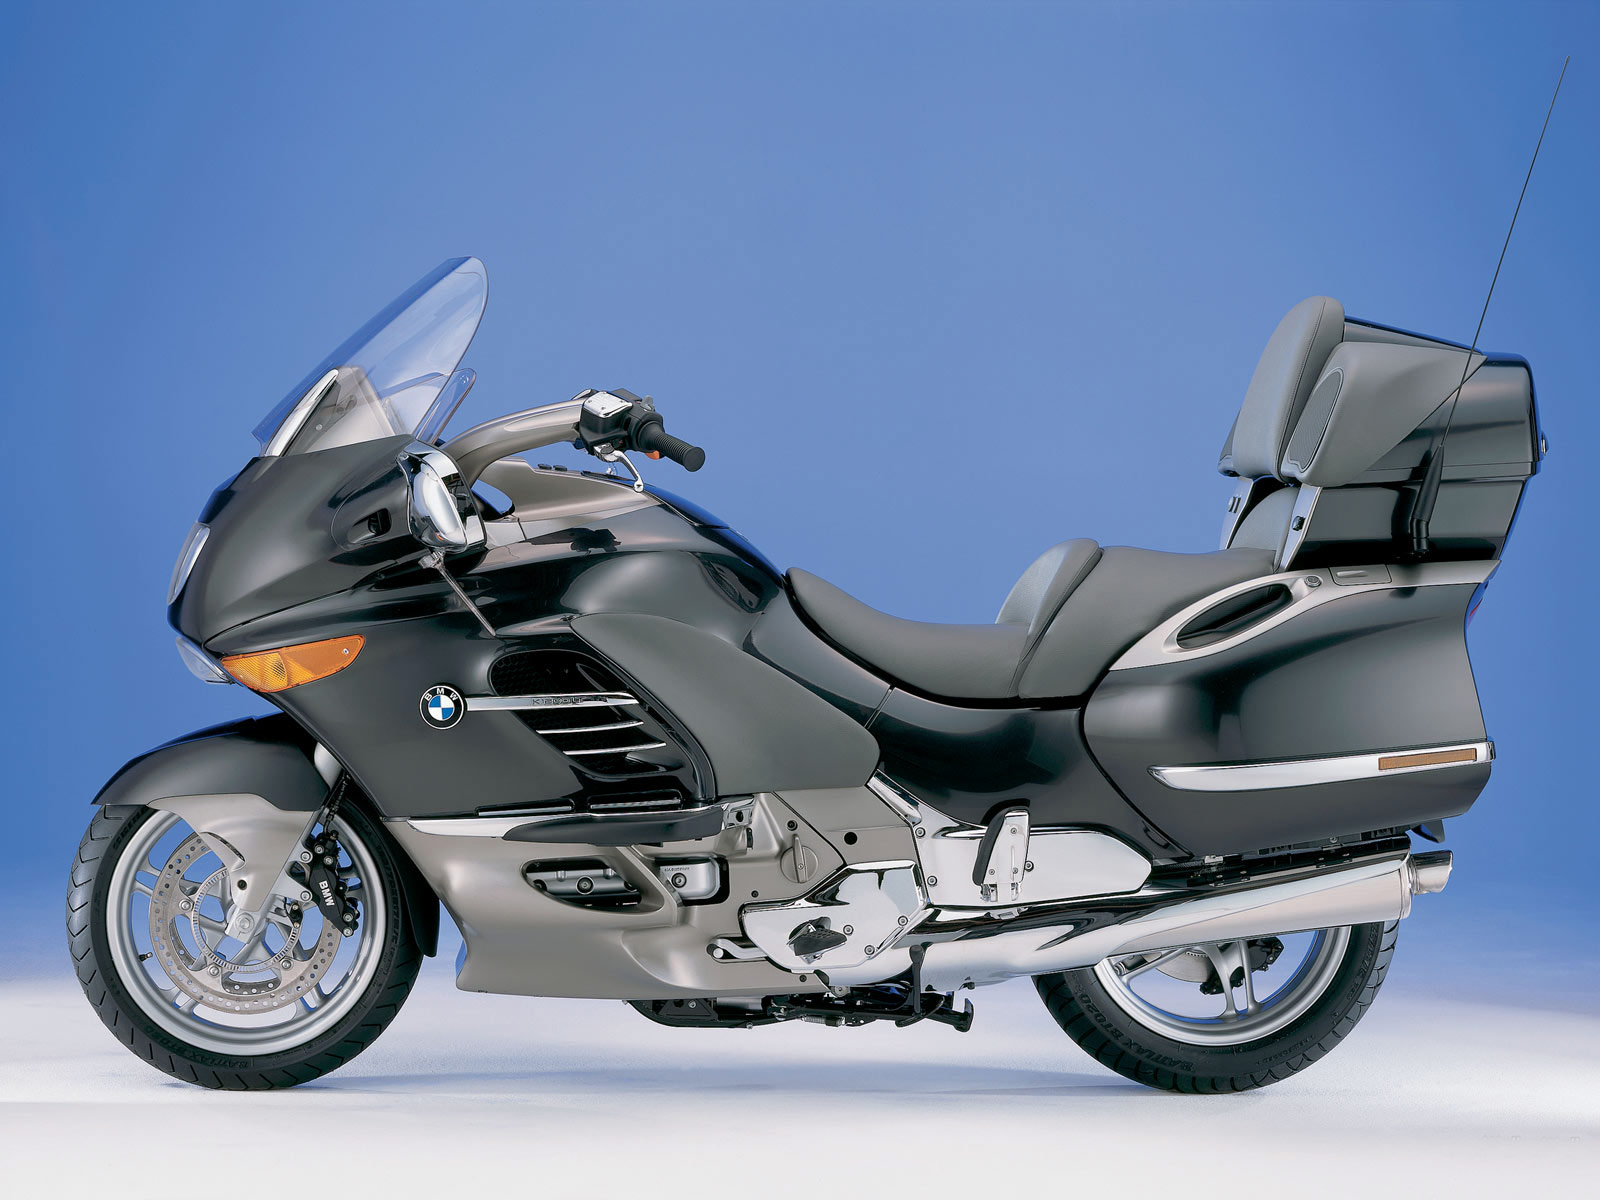 2004 BMW K1200LT motorcycle wallpaper accident lawyers info